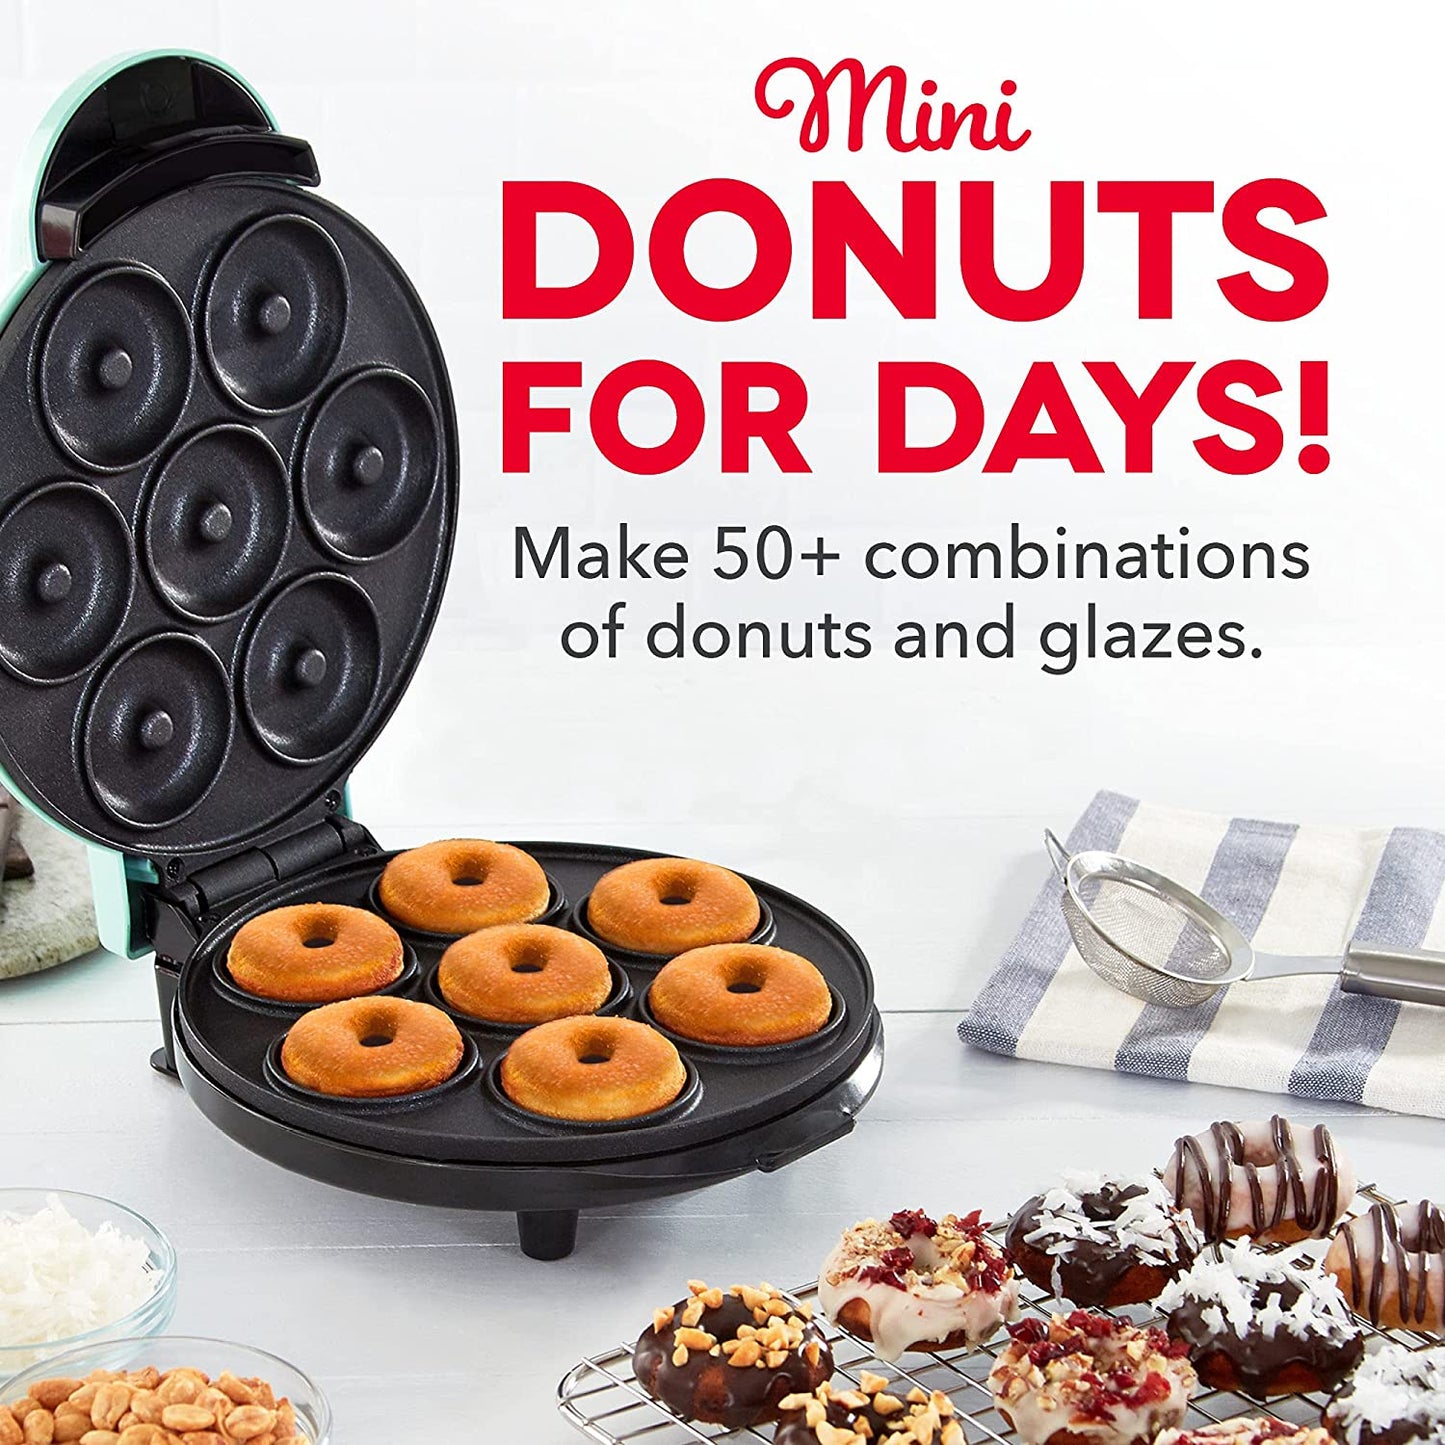 A mini donut maker. The text says, 'Mini donuts for days, make 50+ combinations of donuts and glazes.